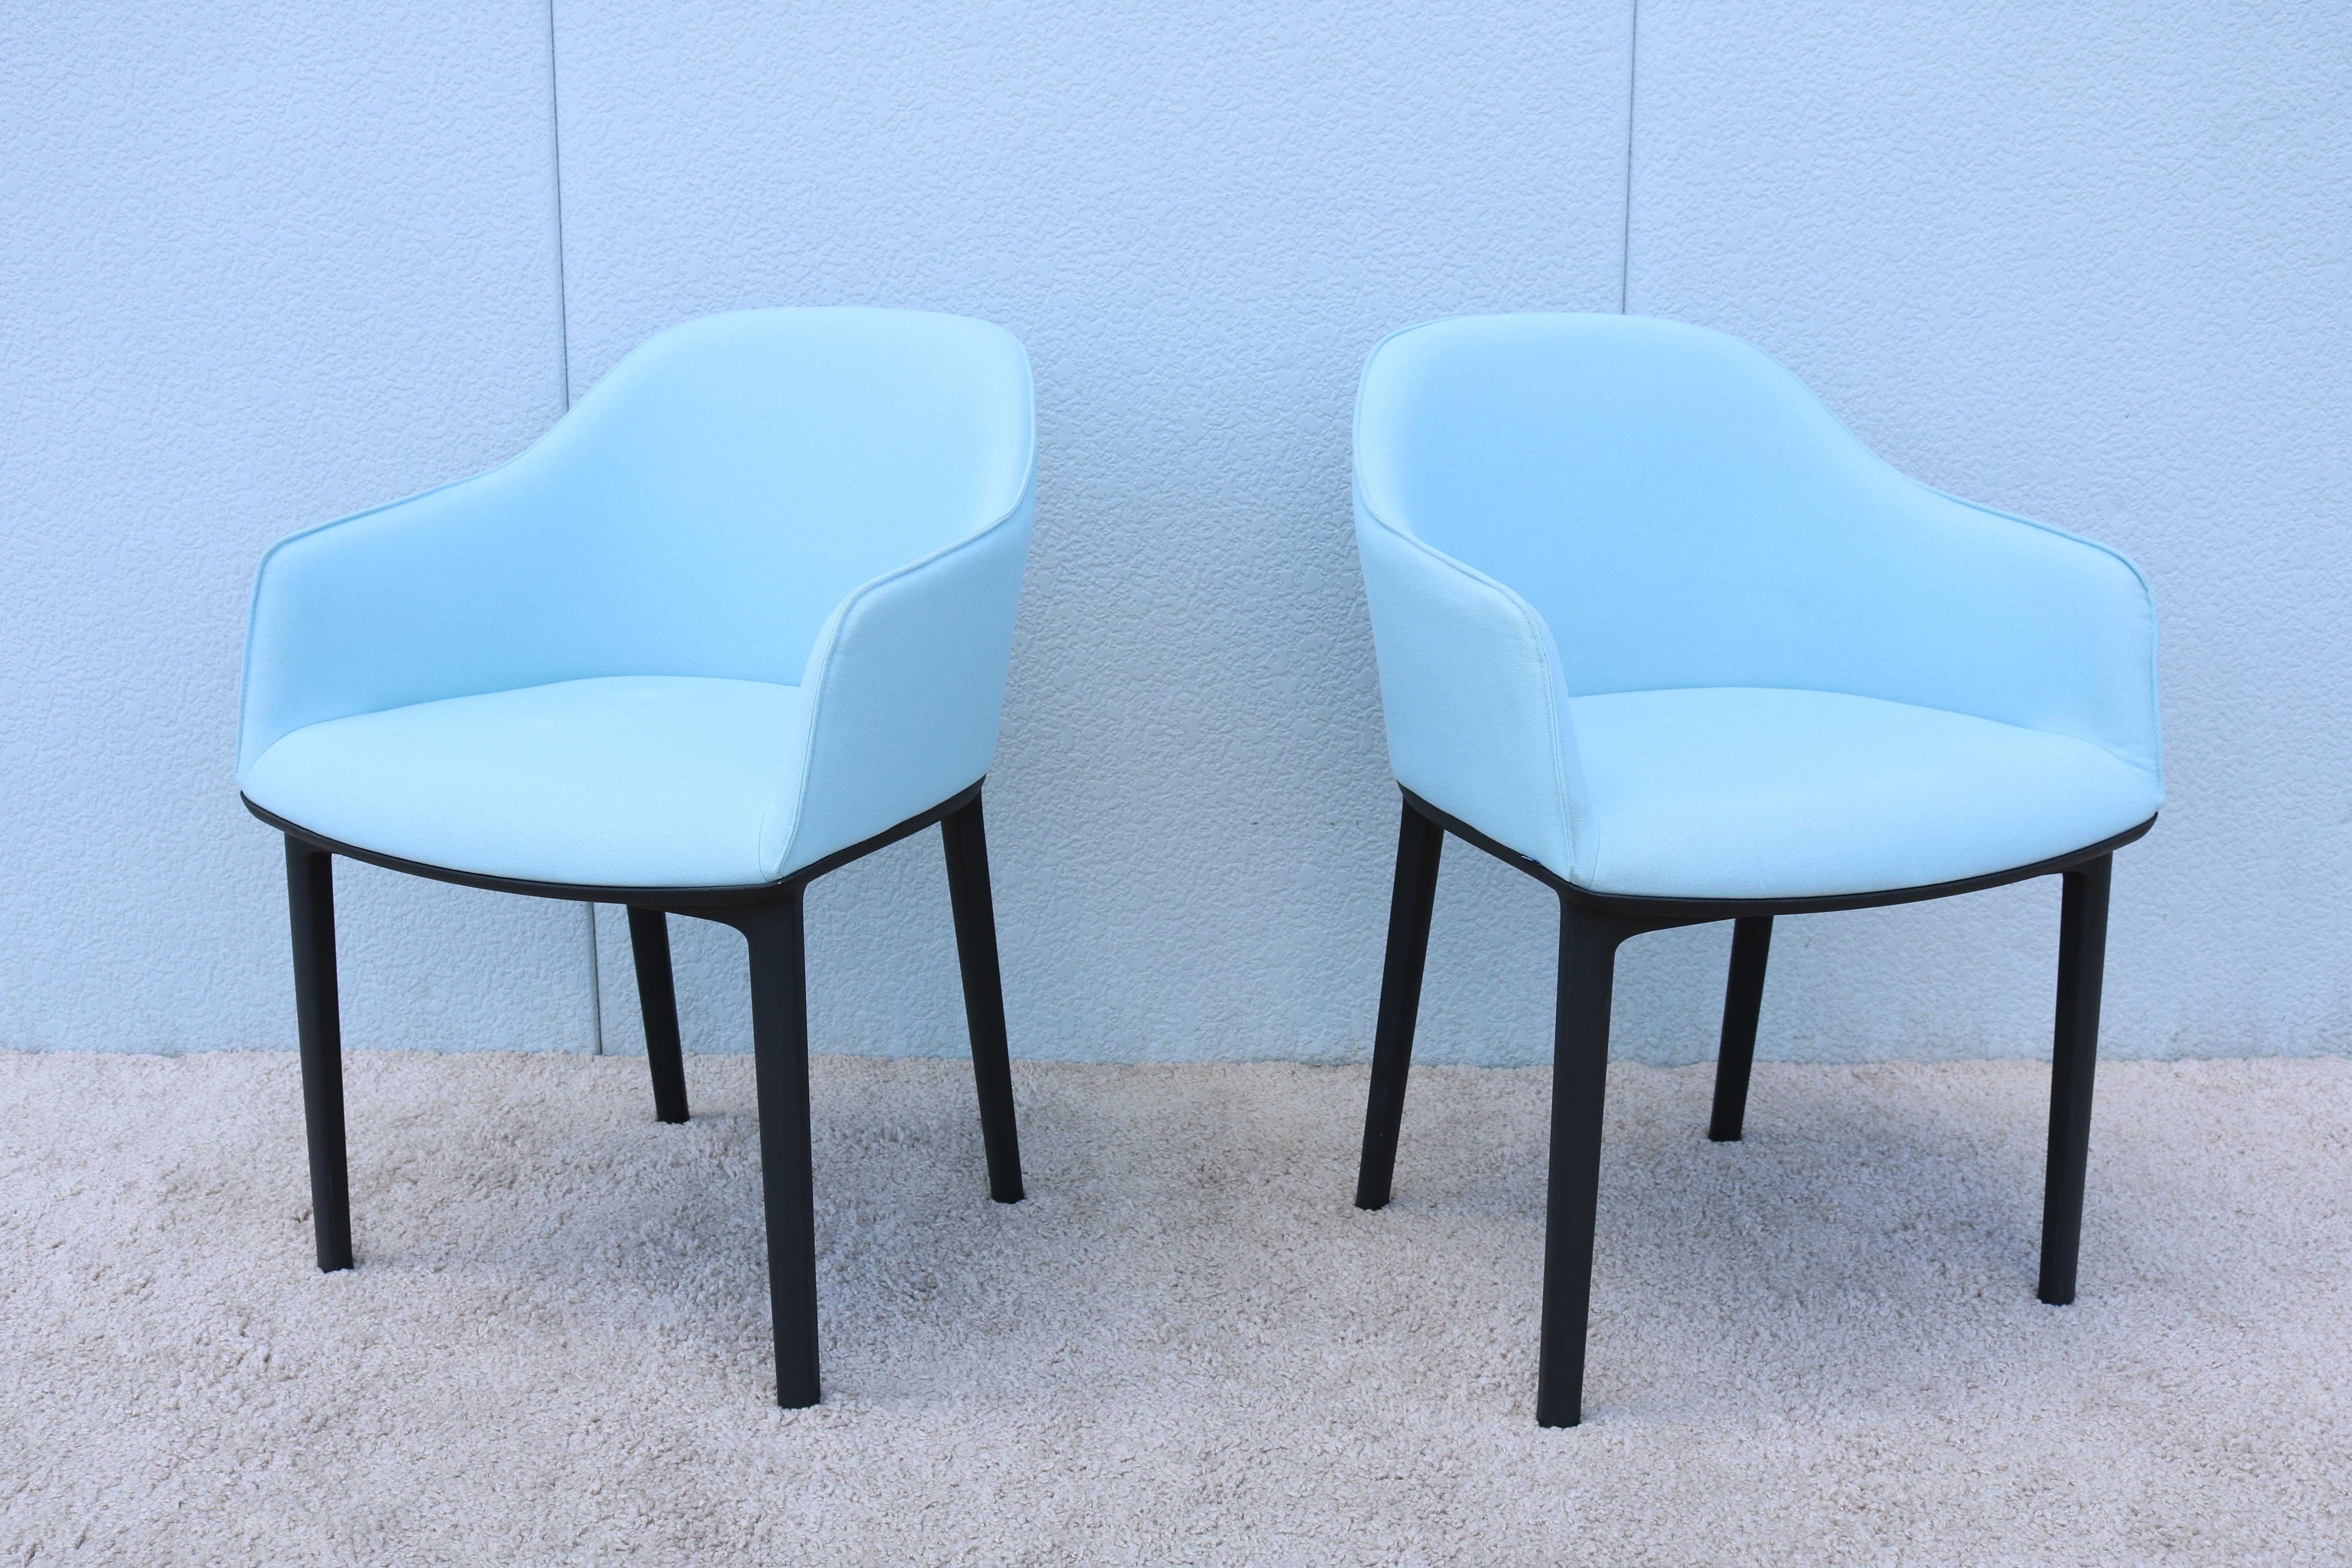 Contemporary Modern Ronan and Erwan Bouroullec for Vitra Ice Blue Softshell Chairs, a Pair For Sale